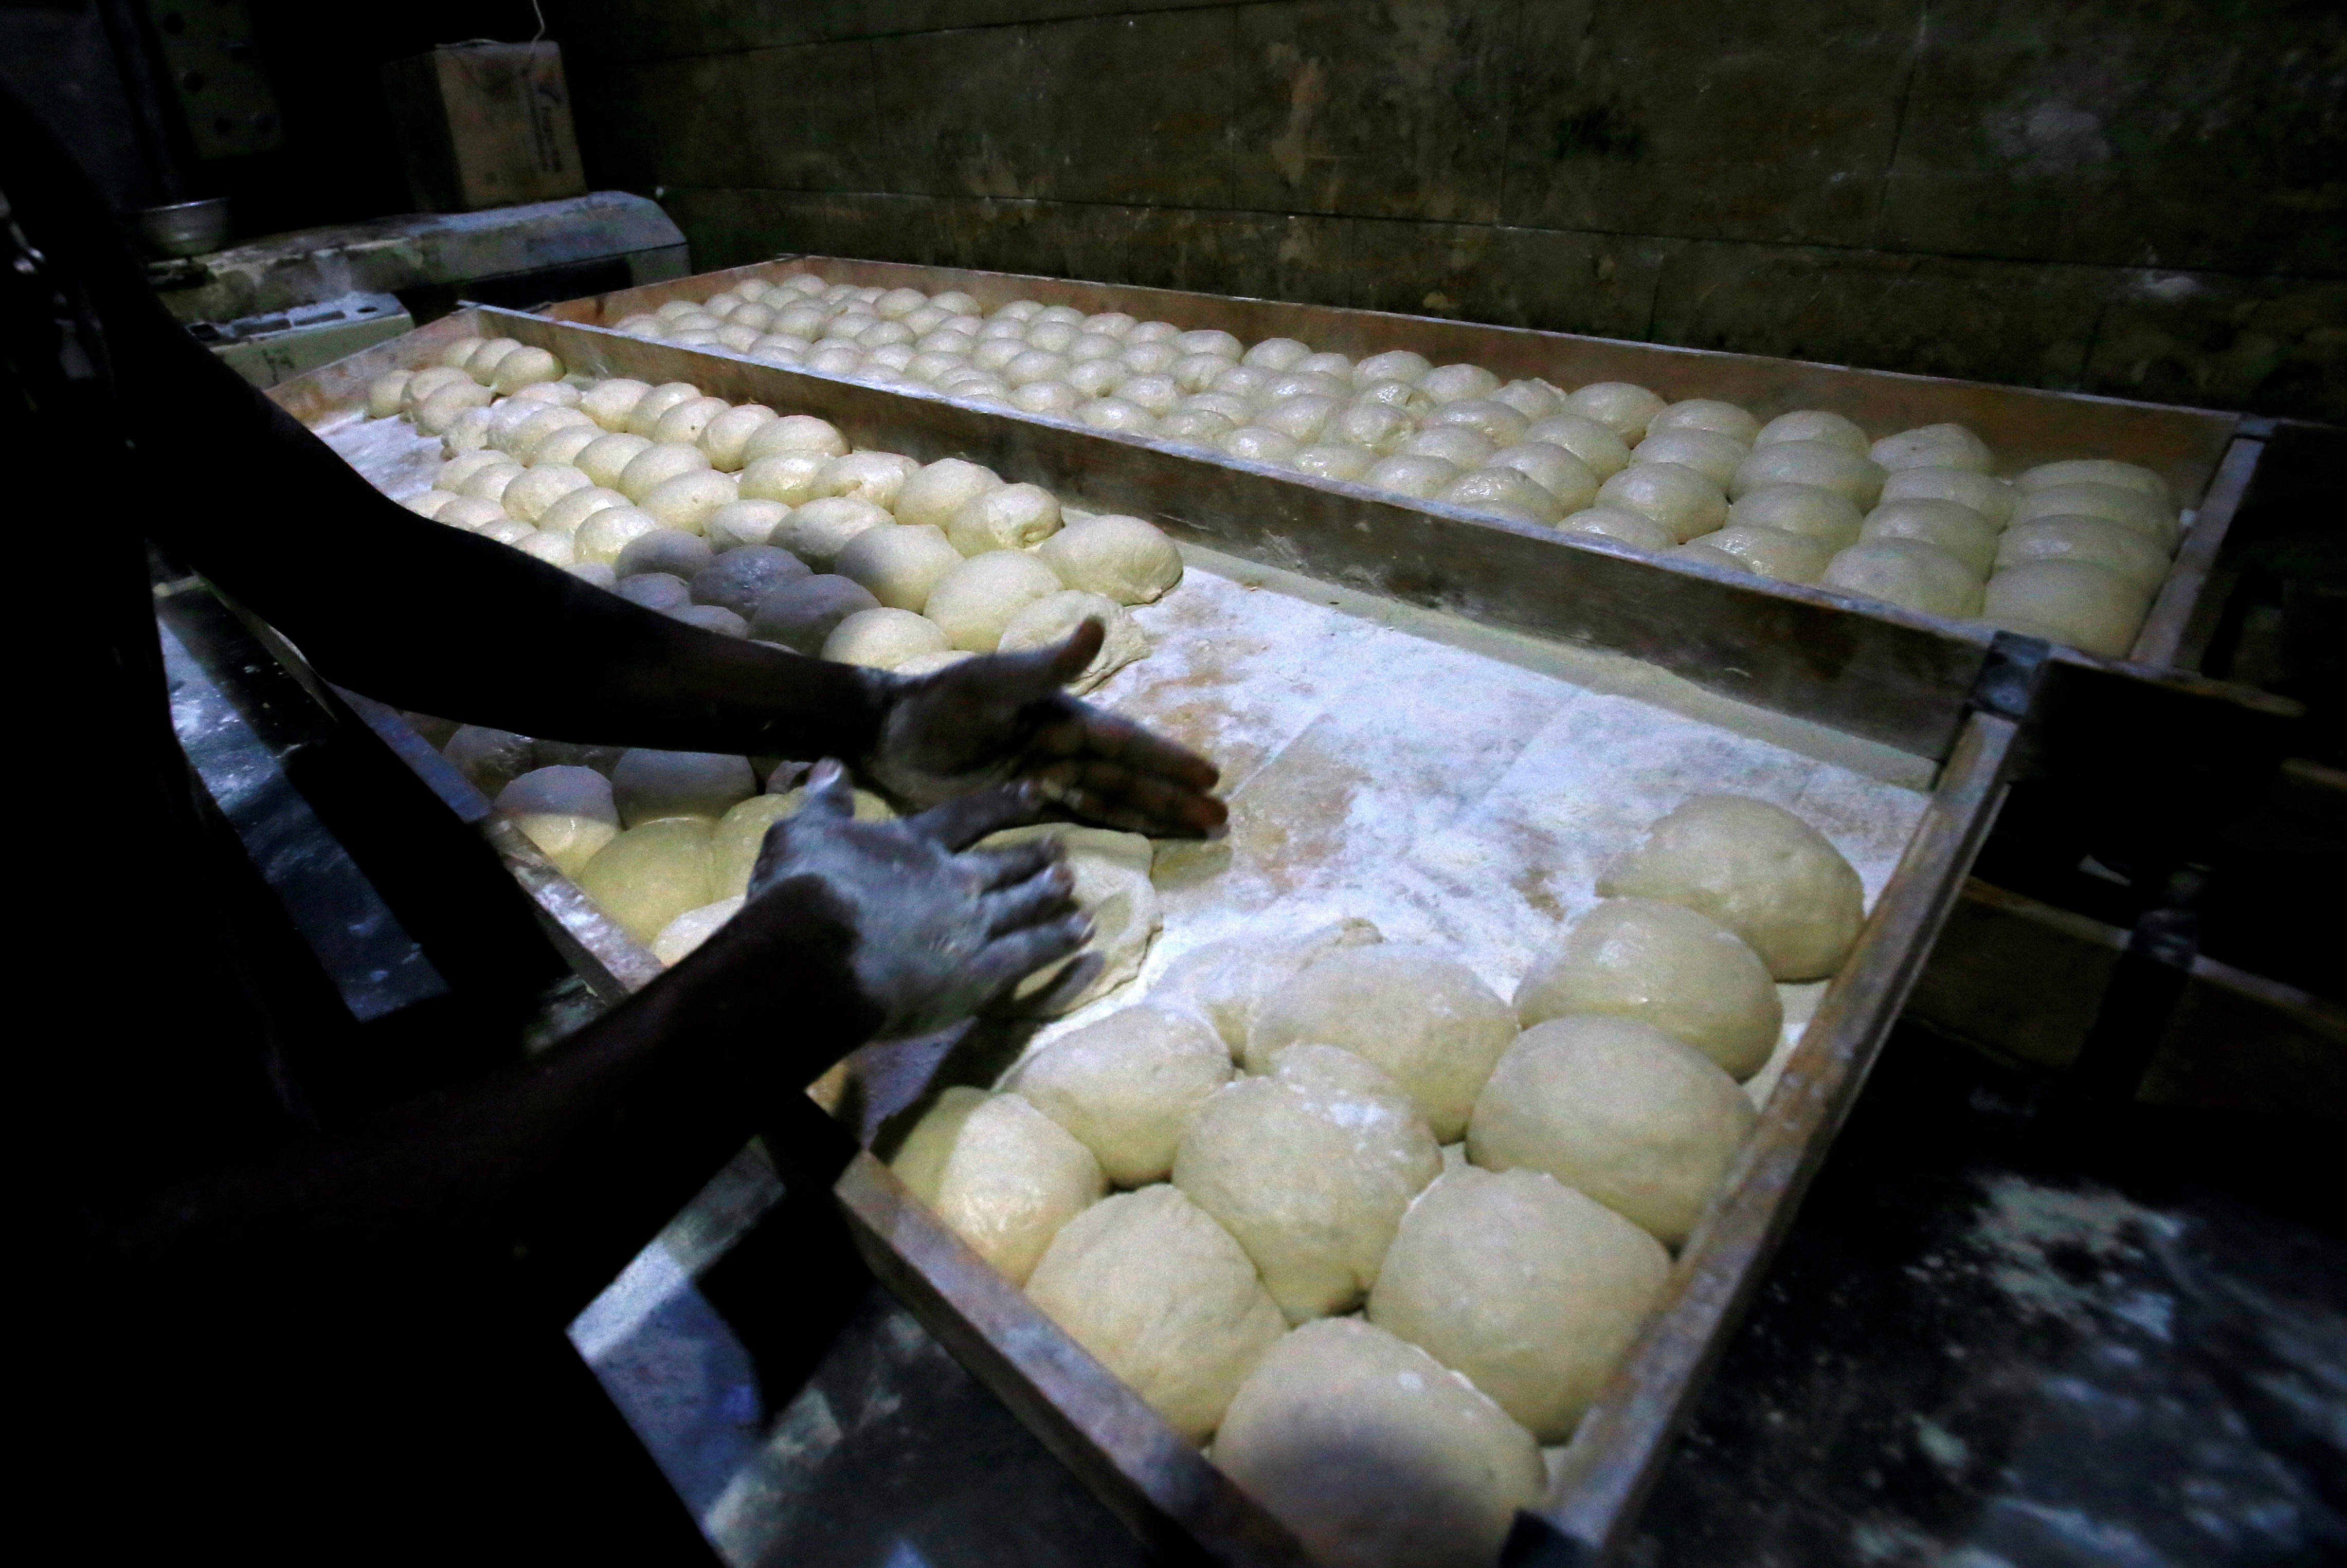 A worker prepares bread dough before baking in a traditional oven at a bakery in Khartoum